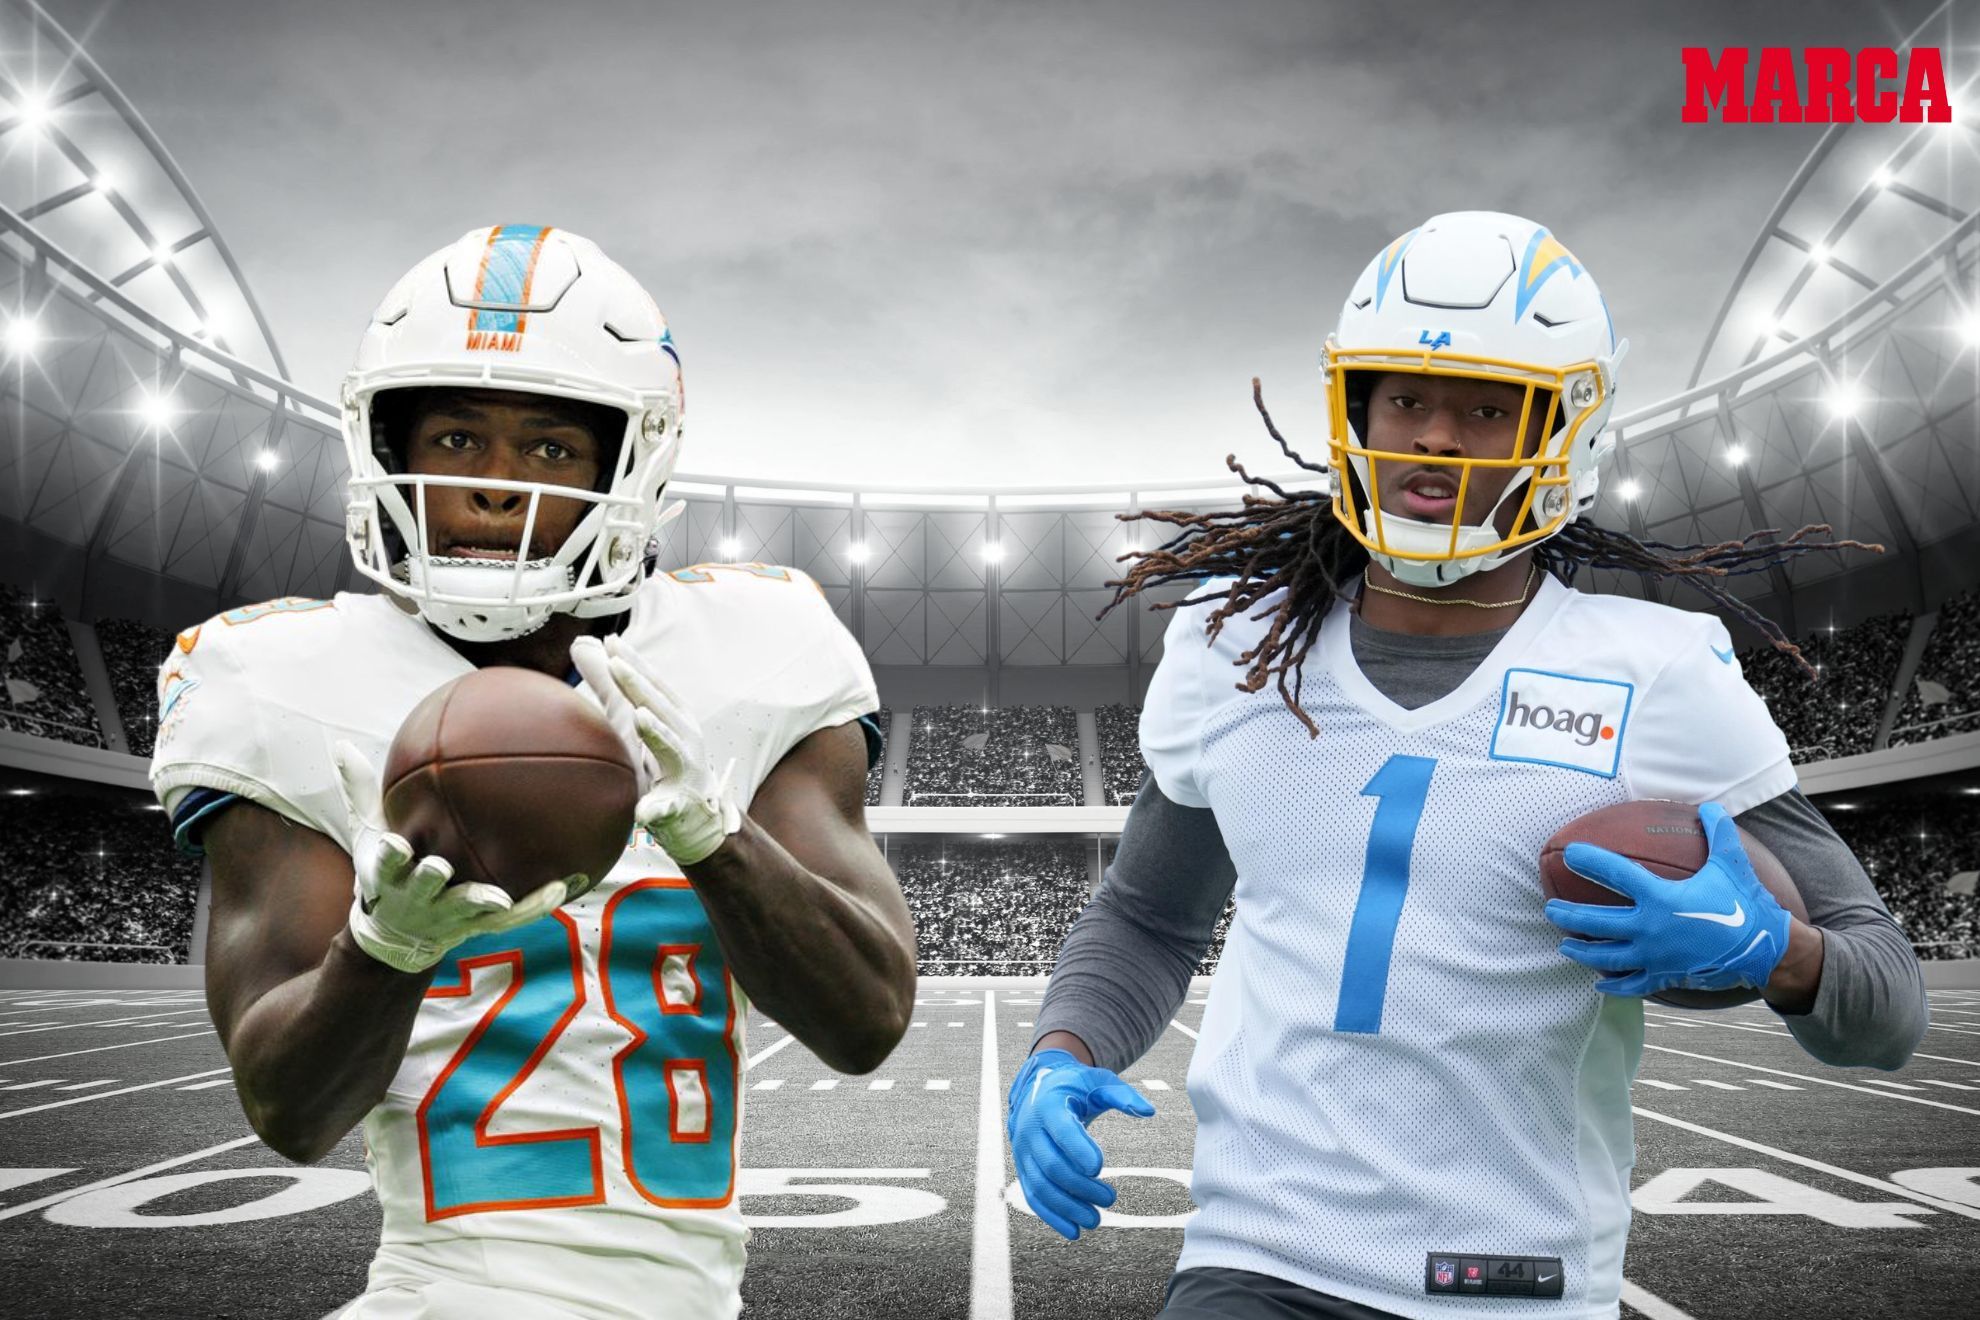 Waiver Wire Week 4 - NFL Fantasy Football 2023: waivers, adds and rankings